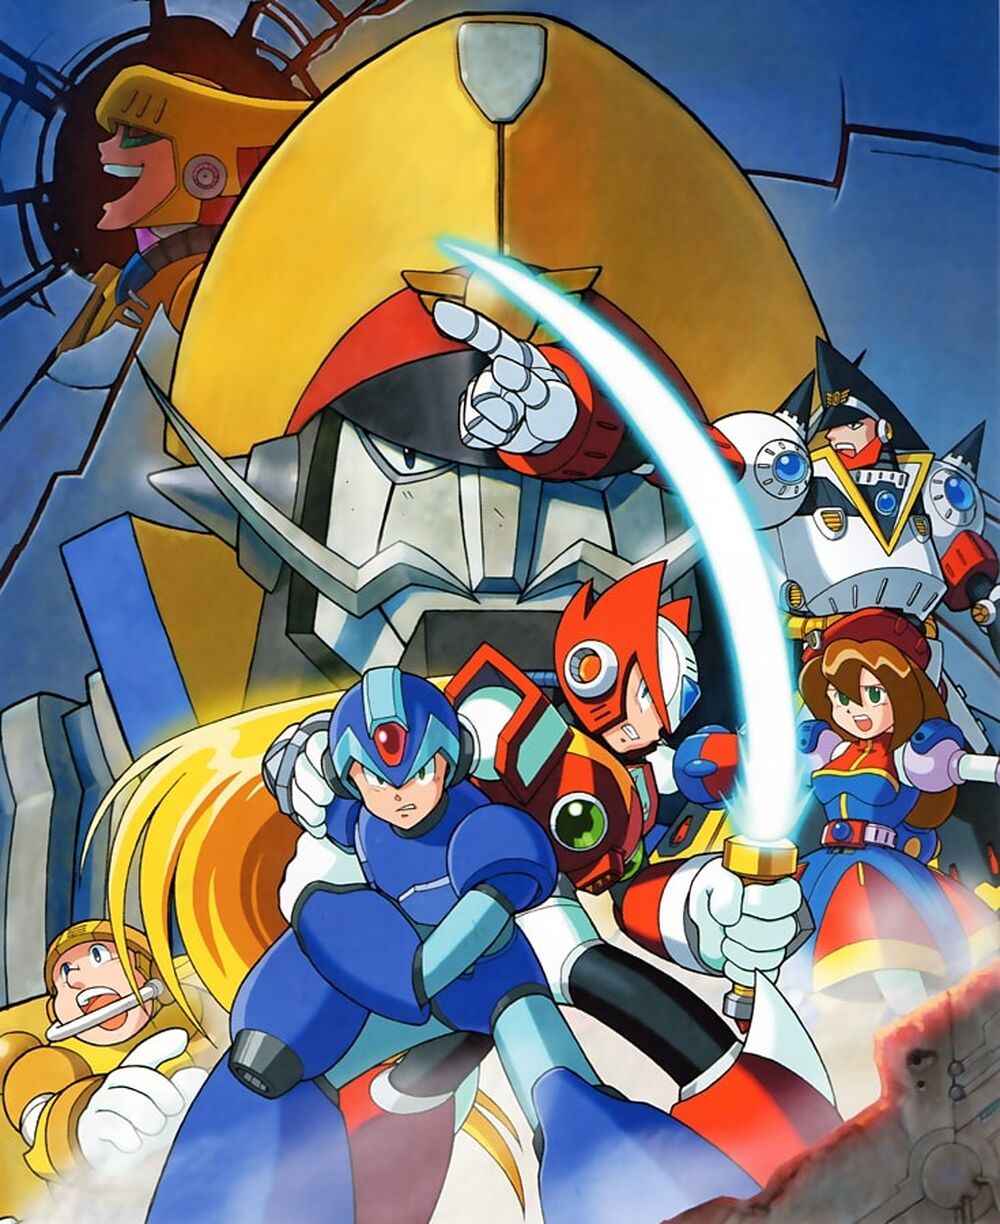 http://images3.wikia.nocookie.net/__cb20100704002625/megaman/images/thumb/0/0d/MMX4Promo.jpg/1000px-MMX4Promo.jpg